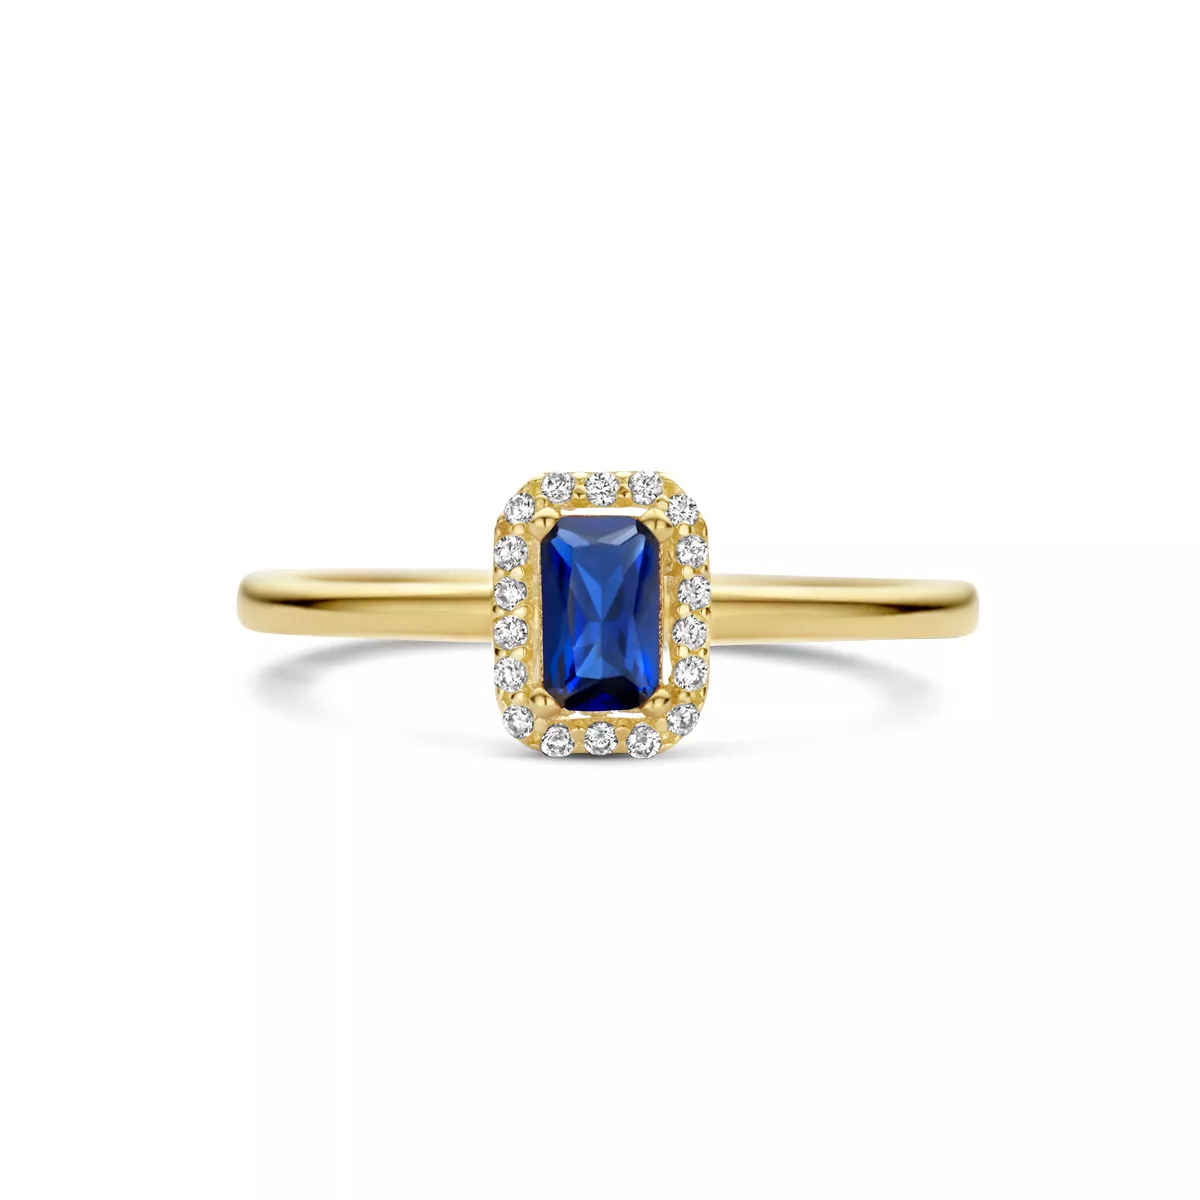 Ring Halo geelgoud-synth. saffier-zirconia blauw-wit 7,5 mm